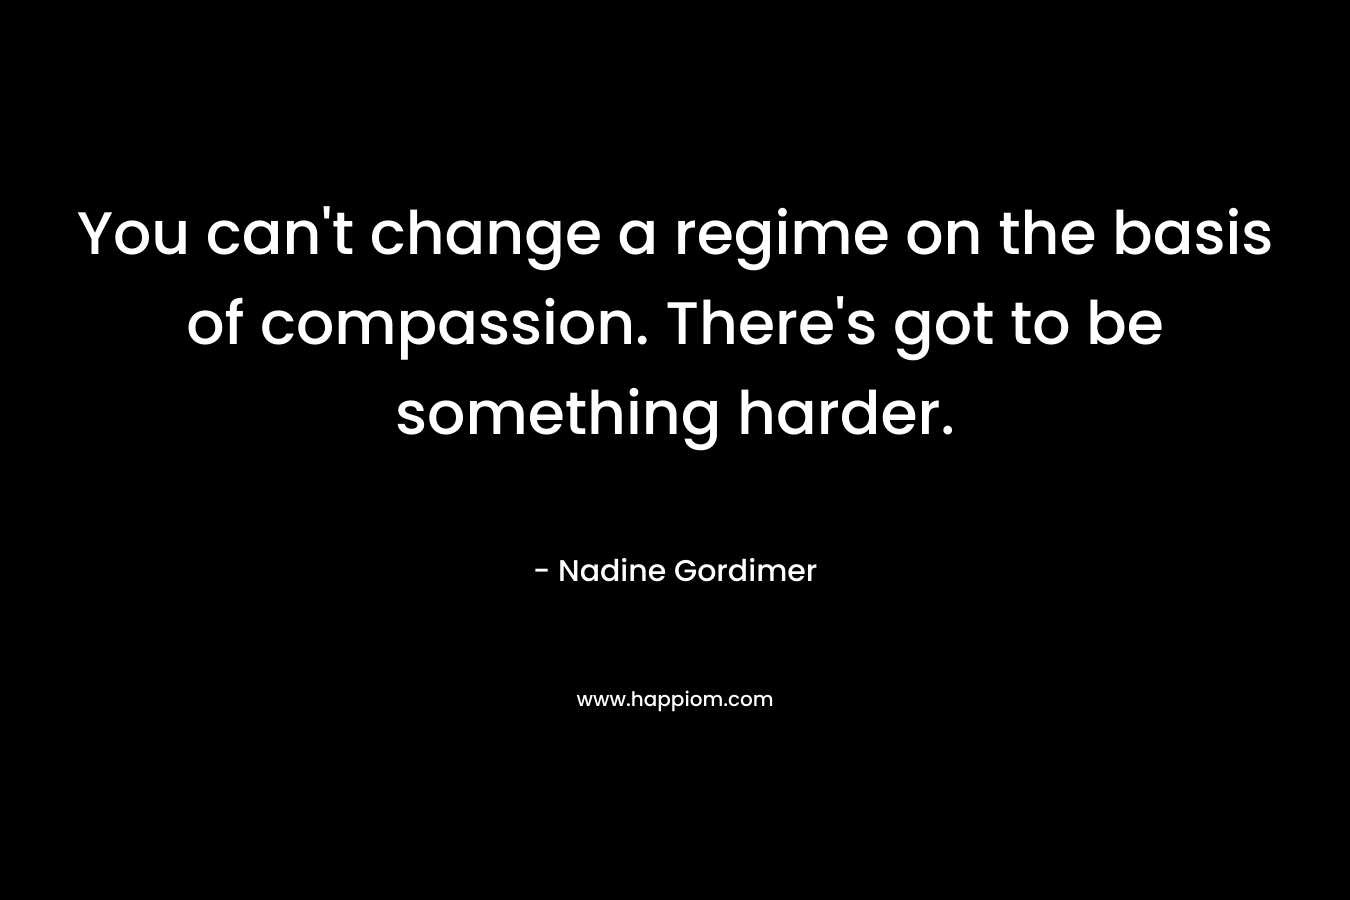 You can't change a regime on the basis of compassion. There's got to be something harder.